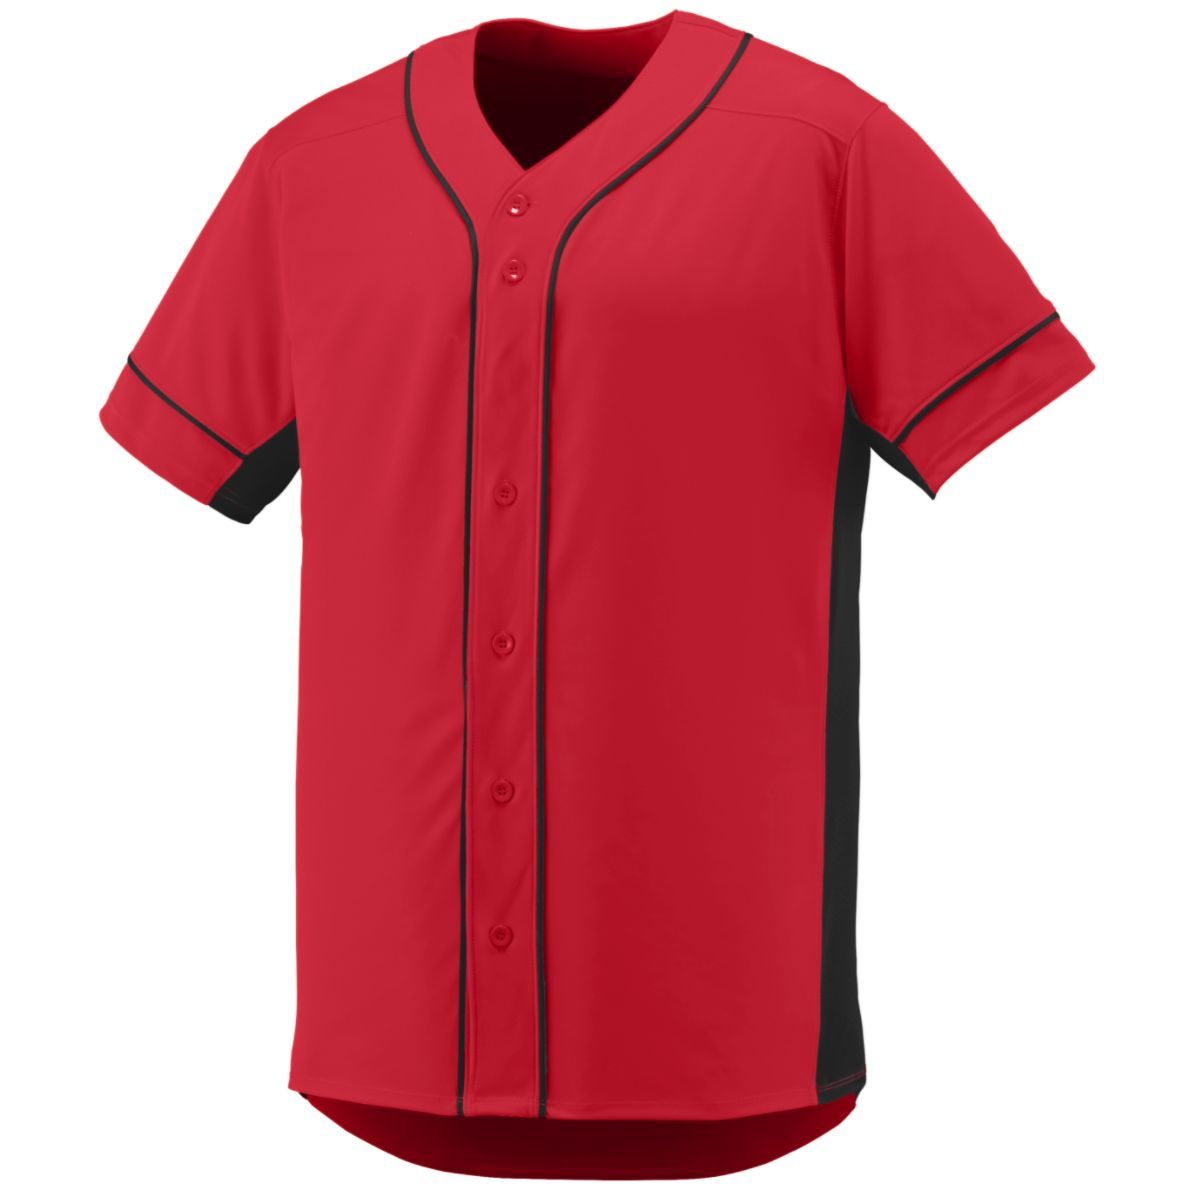 Augusta Sportswear Slugger Jersey in Red/Black  -Part of the Adult, Adult-Jersey, Augusta-Products, Baseball, Shirts, All-Sports, All-Sports-1 product lines at KanaleyCreations.com